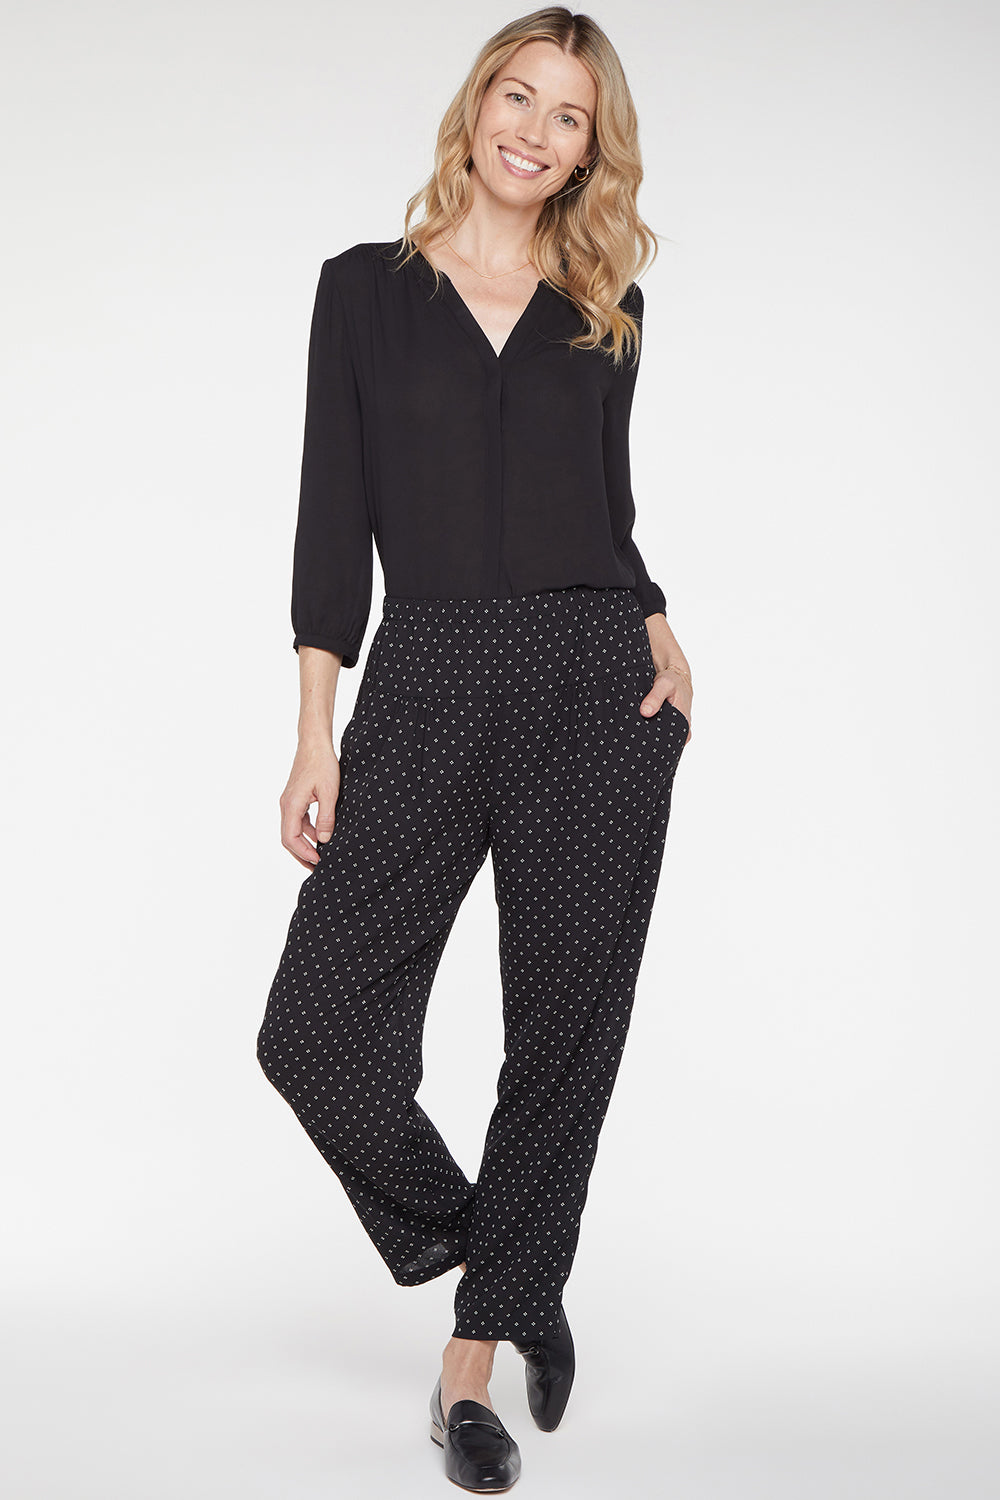 arabesque lether pants-